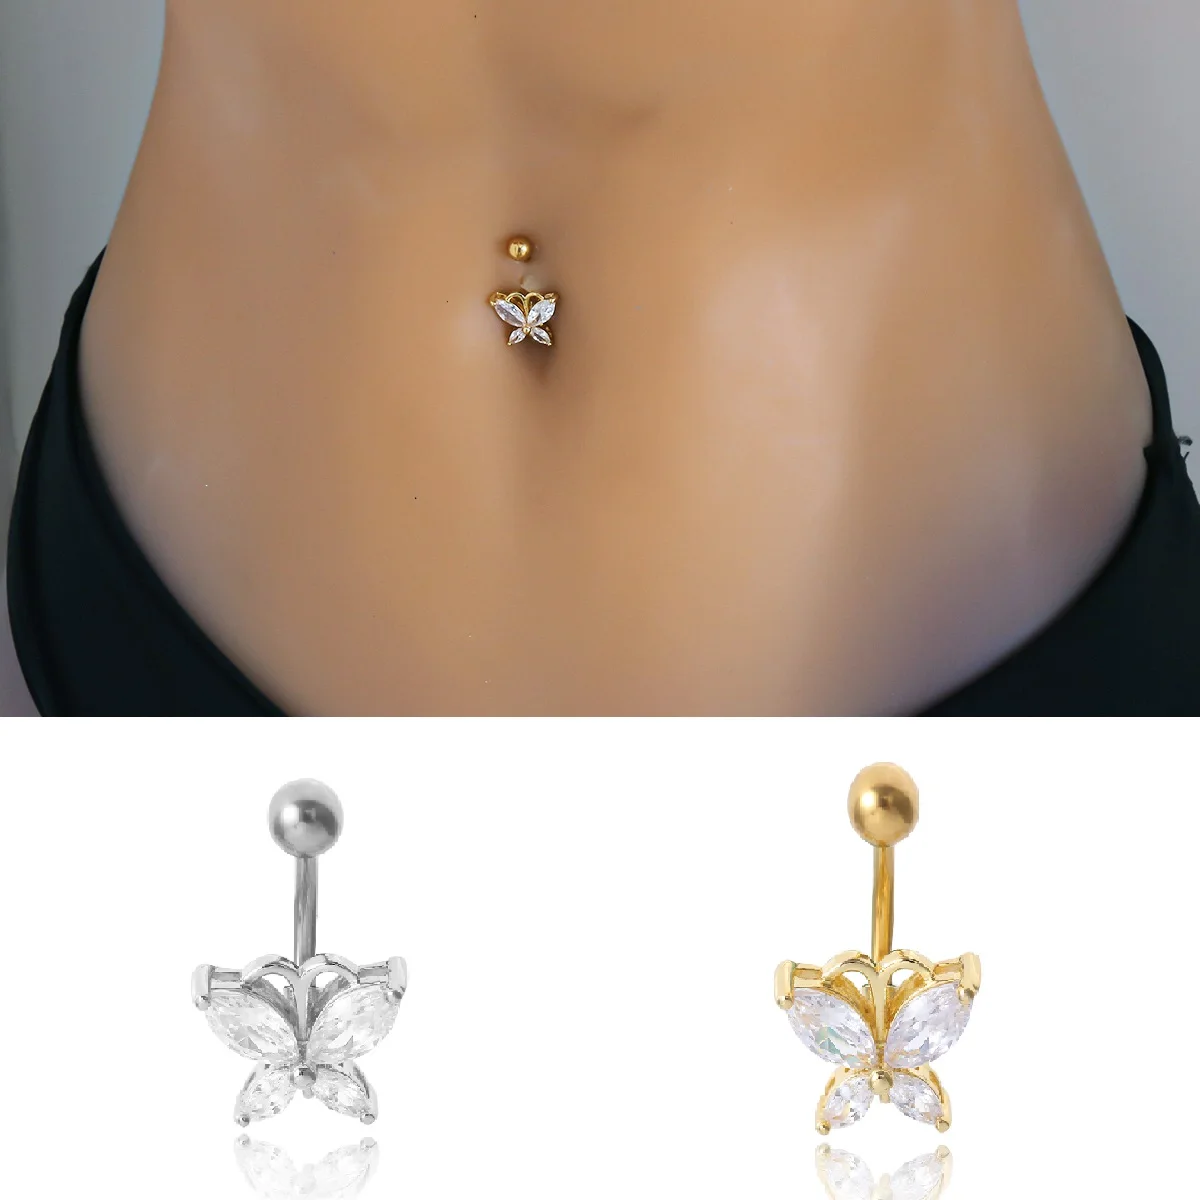 Belly Button Piercings - Explore Belly Bars, Charms + More - Lovisa